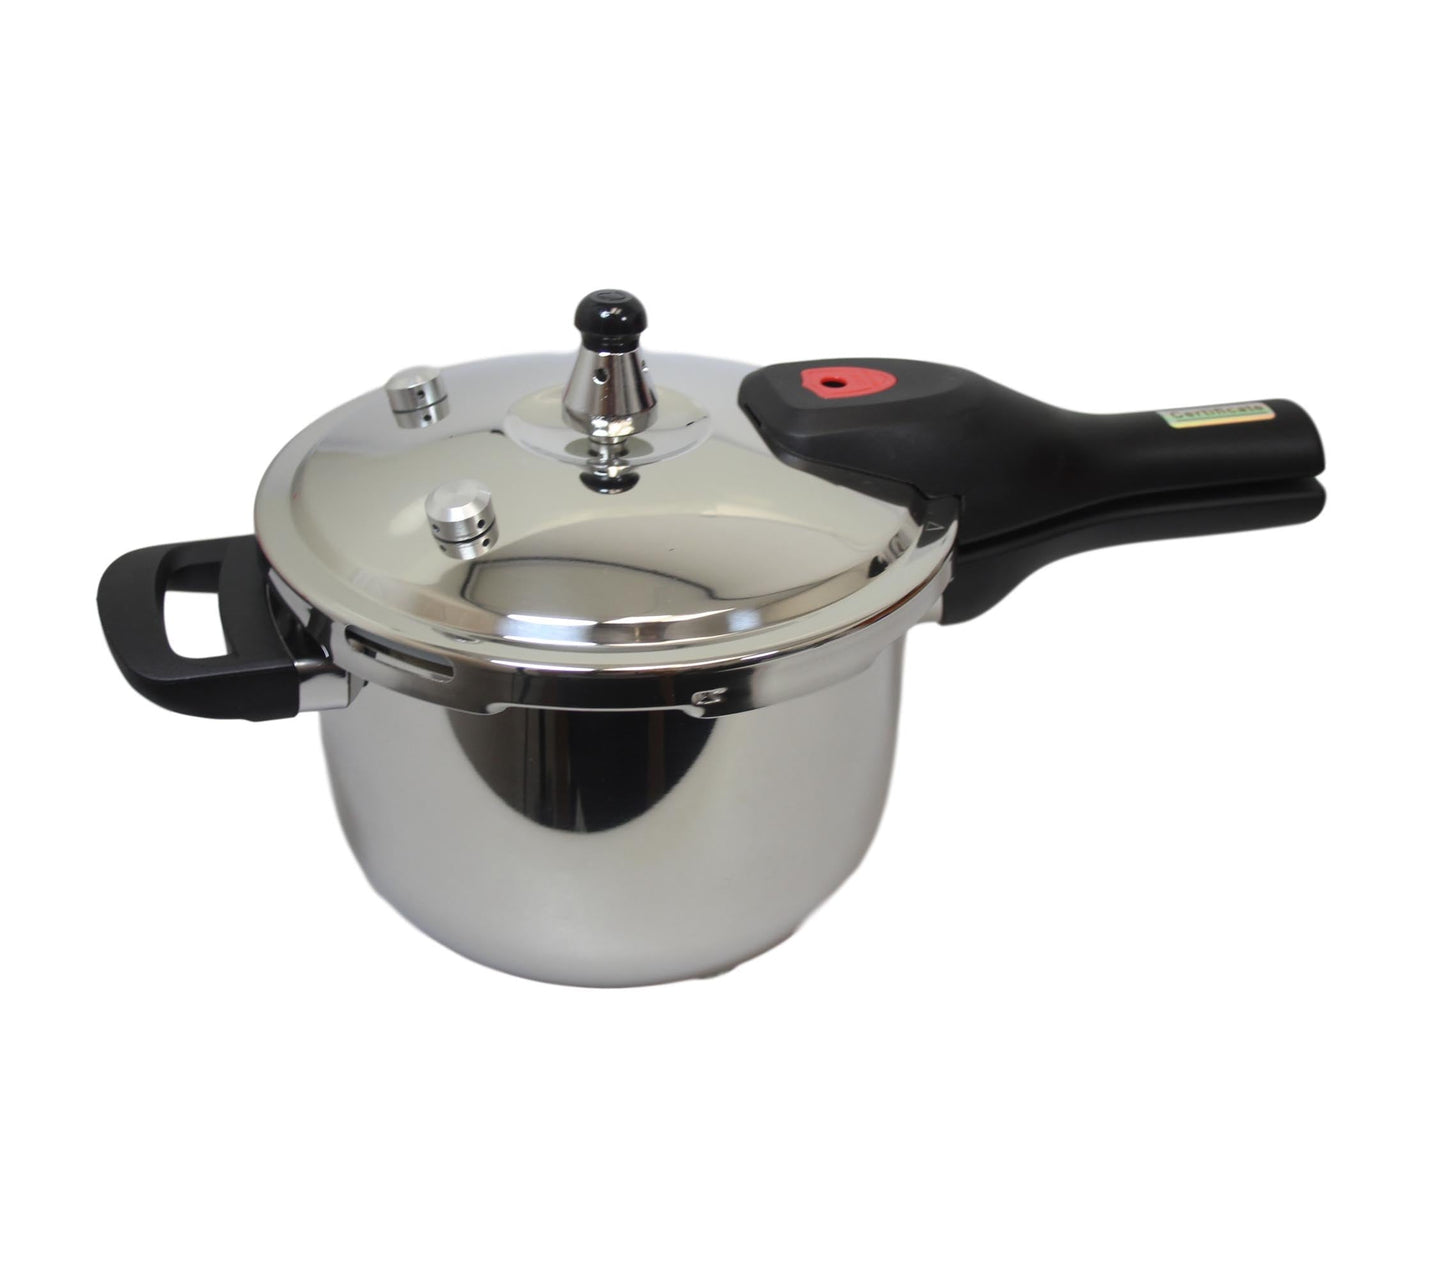 Aluminum Stainless Steel Pressure Cooker Catering Quality Pressure Cooker 18cm 3 Litre 8519 (Big Parcel Rate)